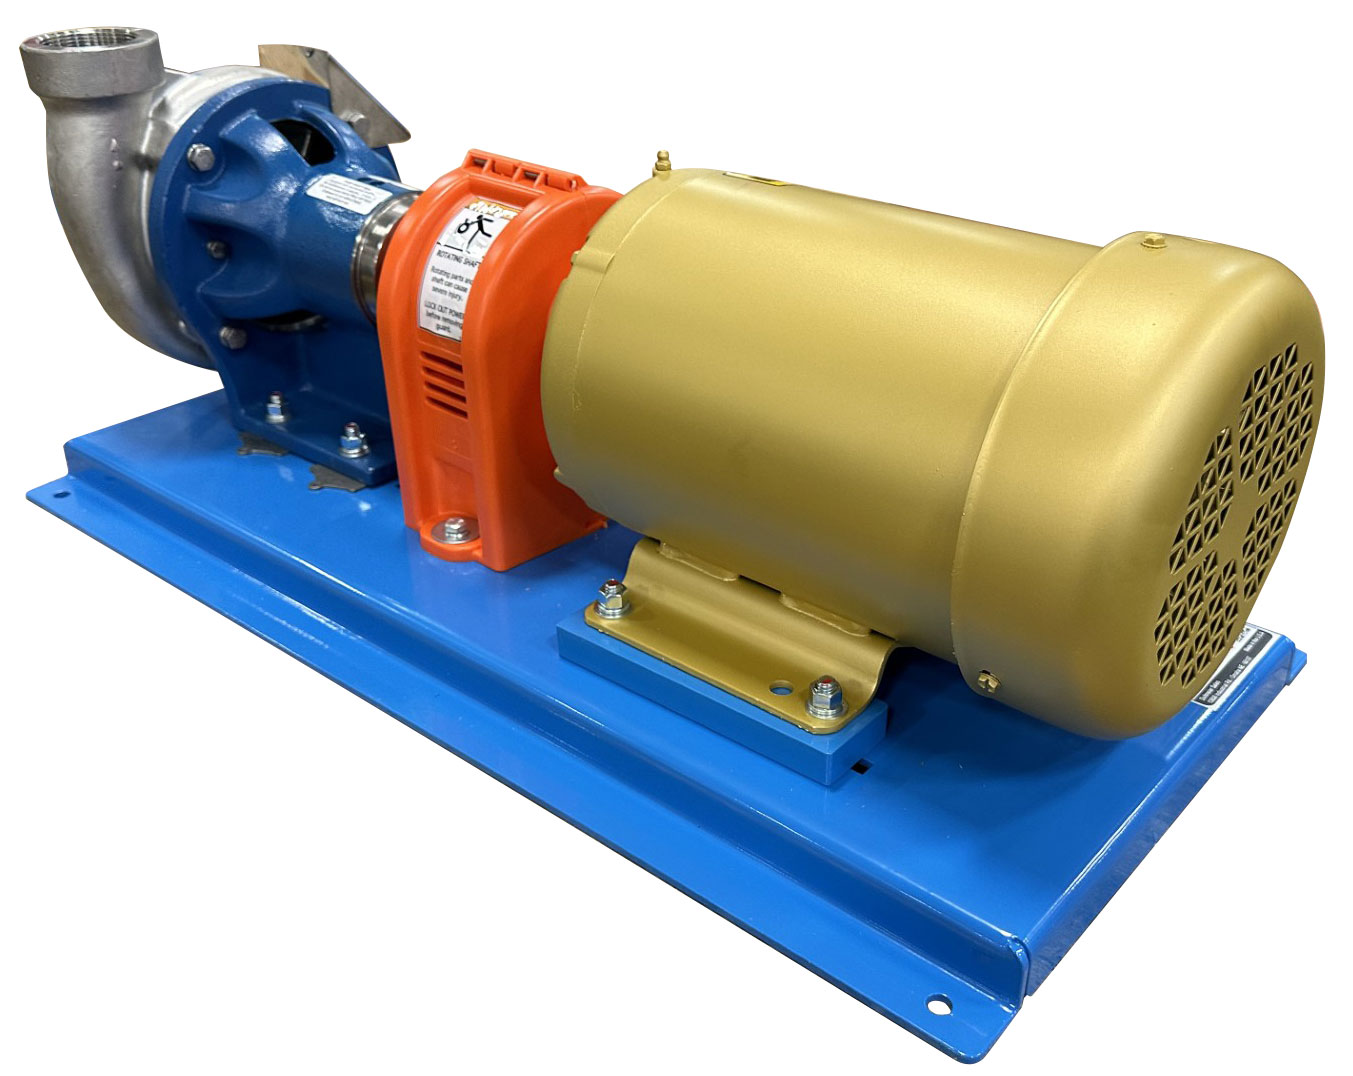 Picture of Centrifugal Pump, Motorpump 602S, 316SS, 2" x 2" FPT, 5 HP / 1PH, TEFC Type 230/460V, Max. Flow 150 GPM, 1.48 S.G. Rating (12.3lbs/gal) , Viton-Silicon